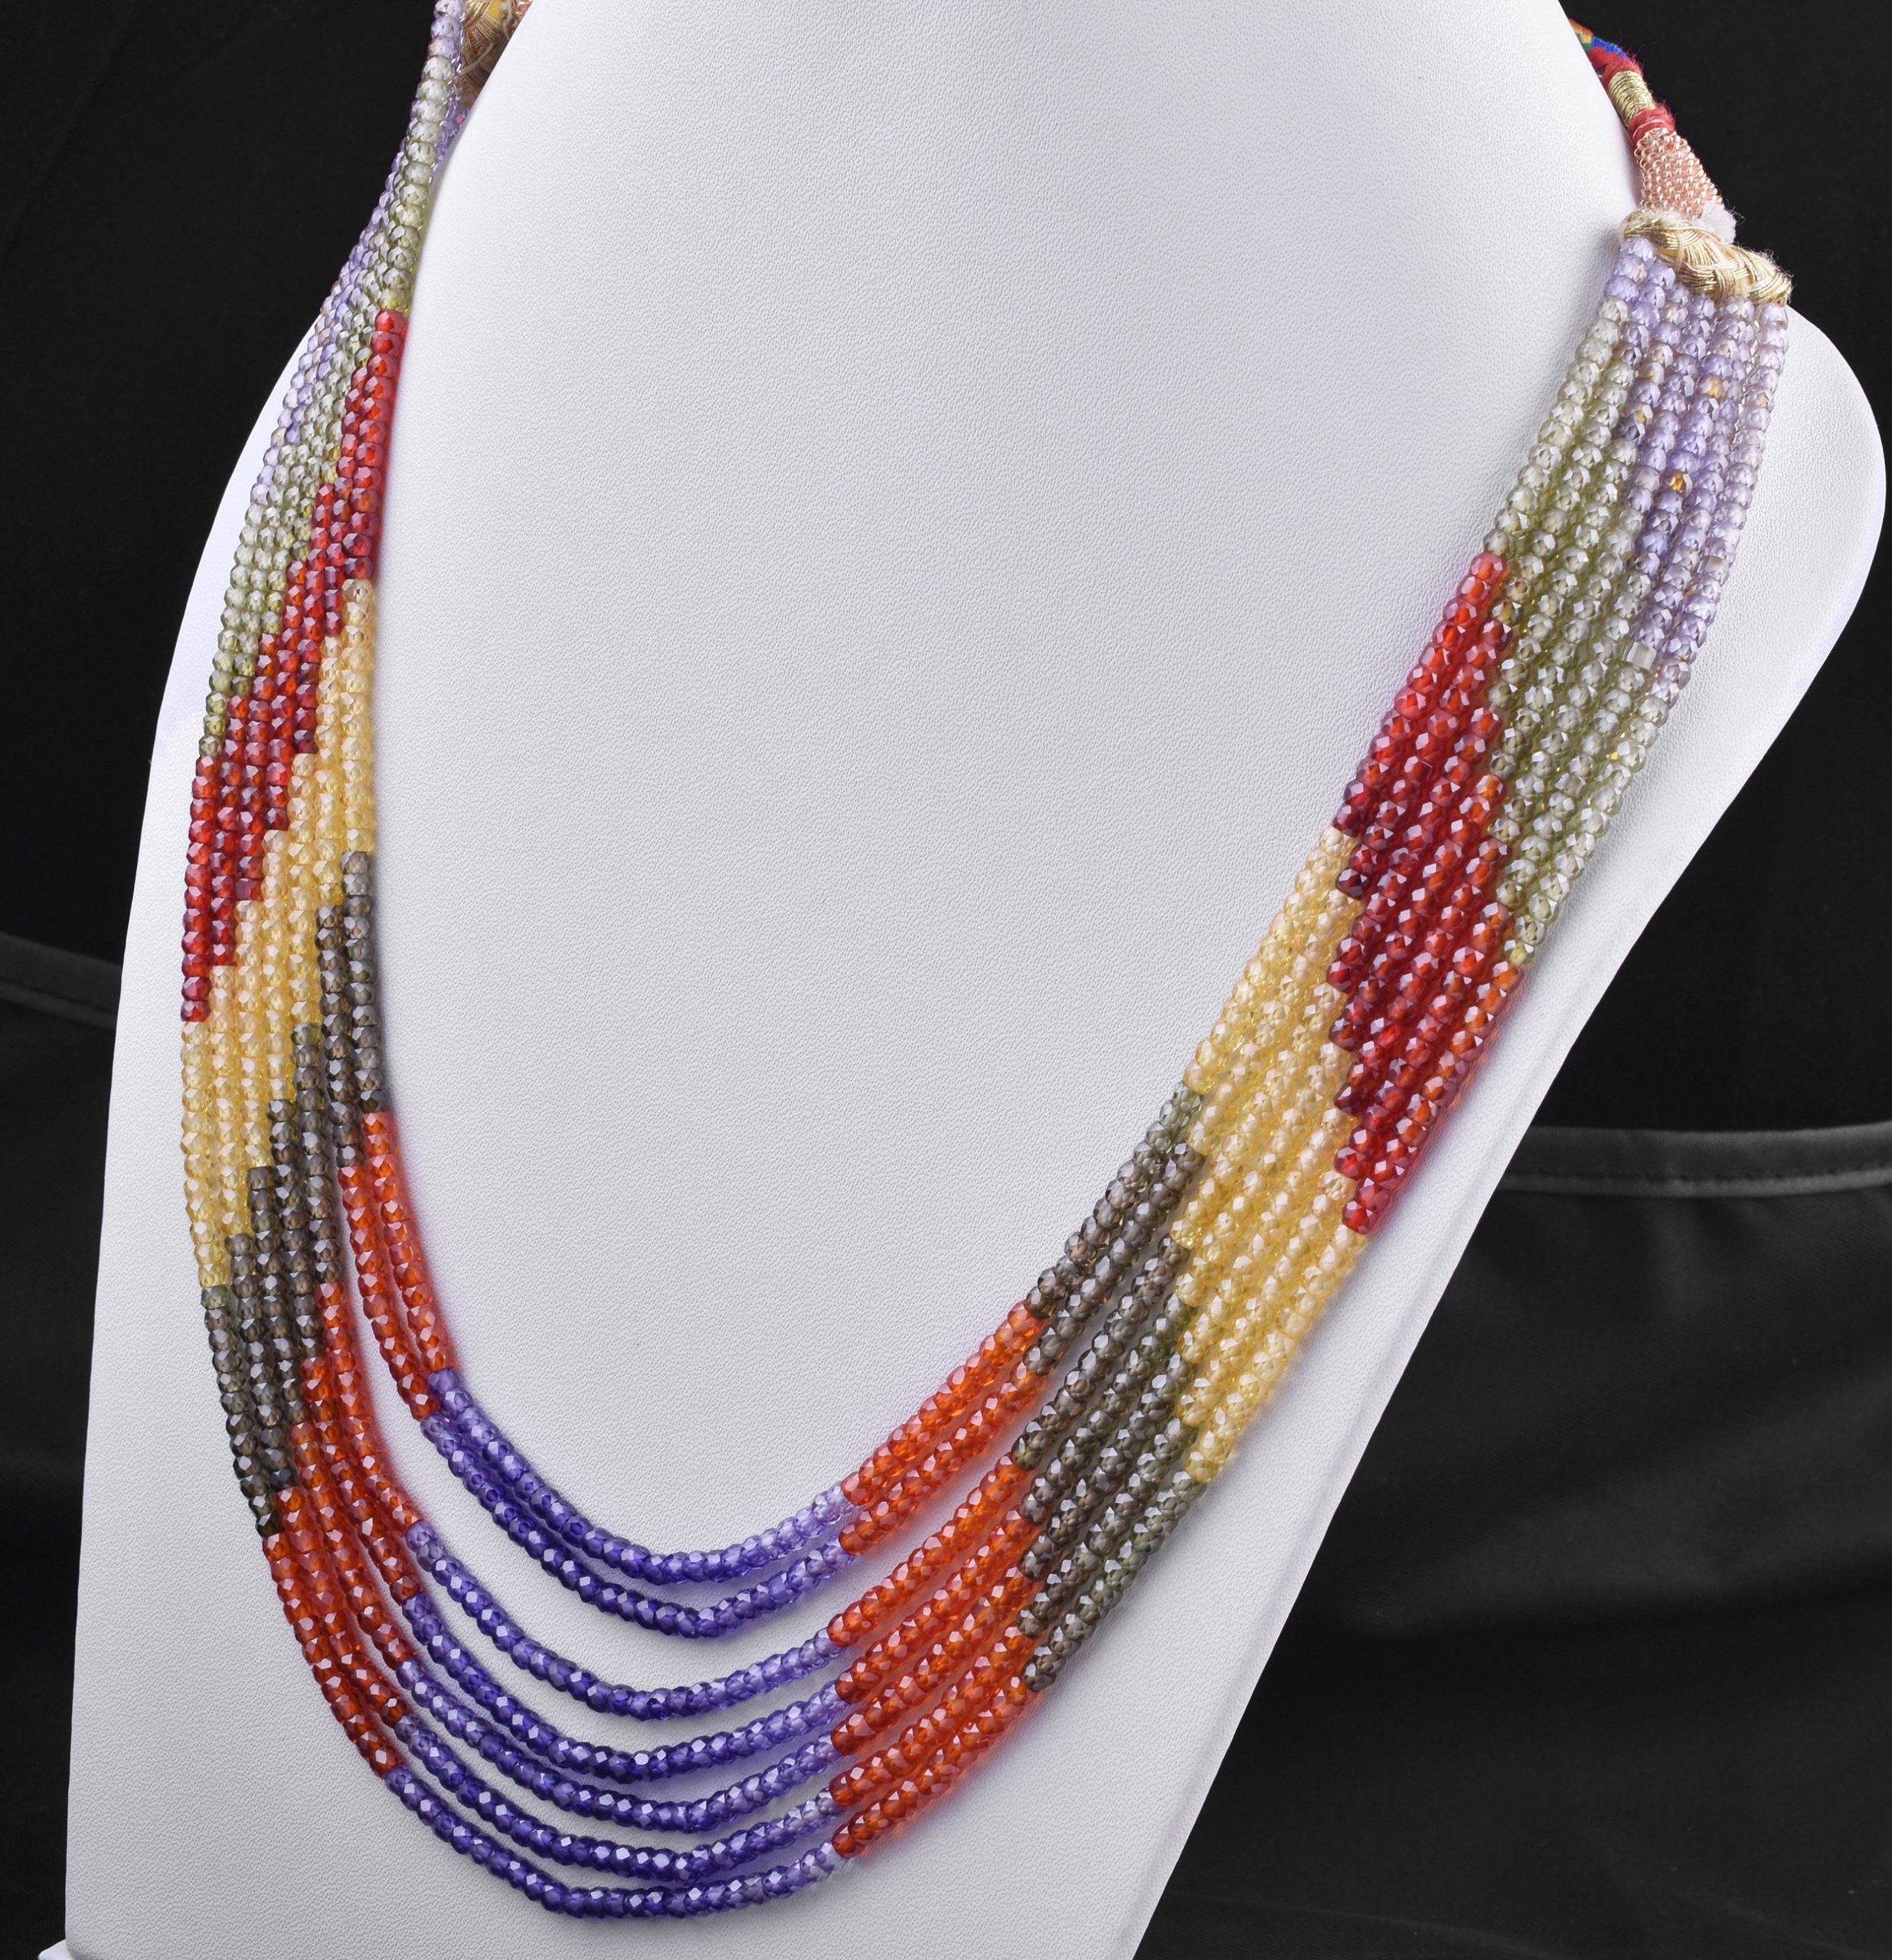 Mix Color Stone Machine Cut Faceted Necklace Multi Stone Faceted Rondelle Shape Beads Necklace with Silver Lock Multi Color Stone Necklace